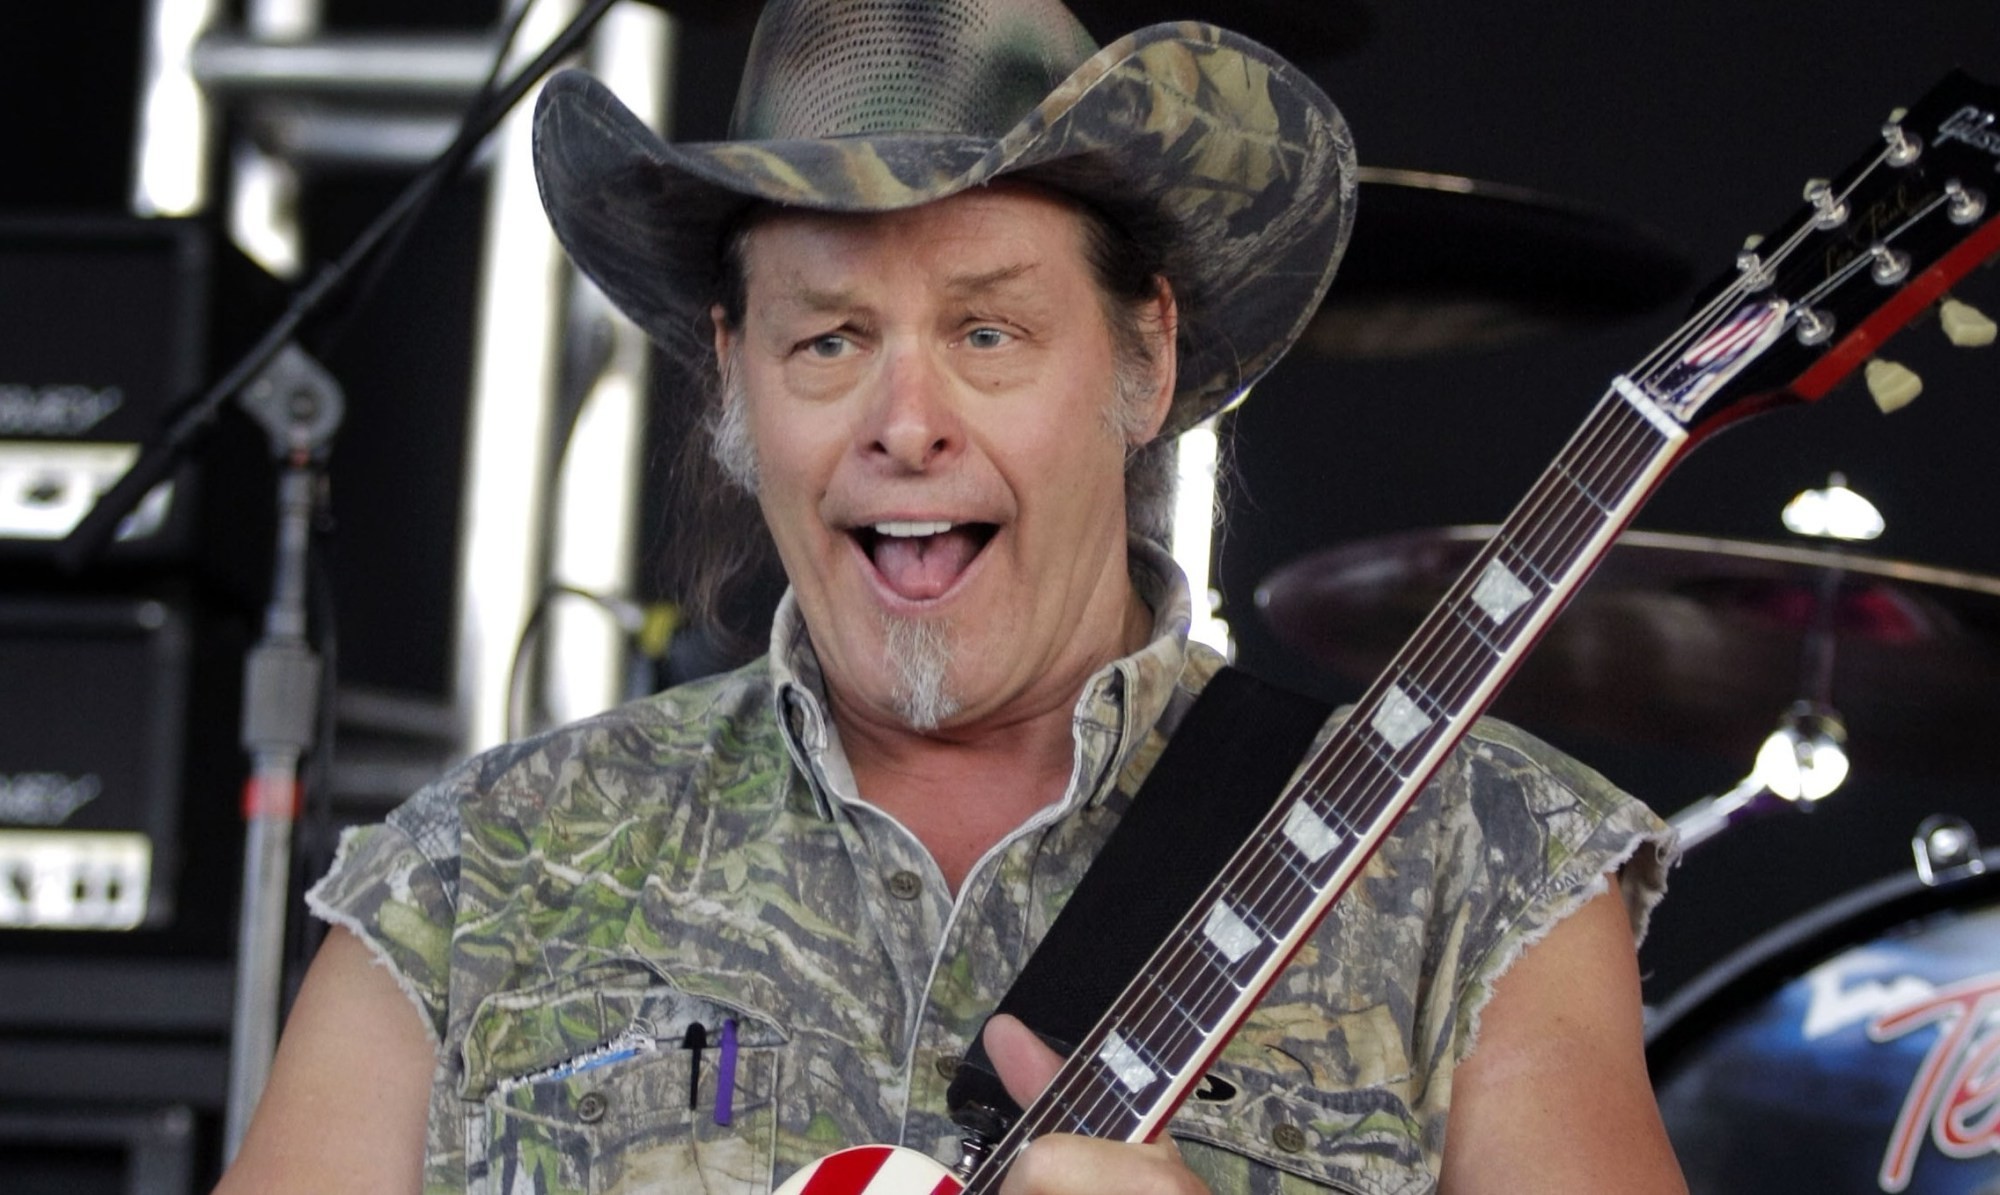 Ted Nugent Totally Triggered by Not Being Inducted into the Rock & Roll Hall of Fame | Scene and Heard: Scene's News Blog